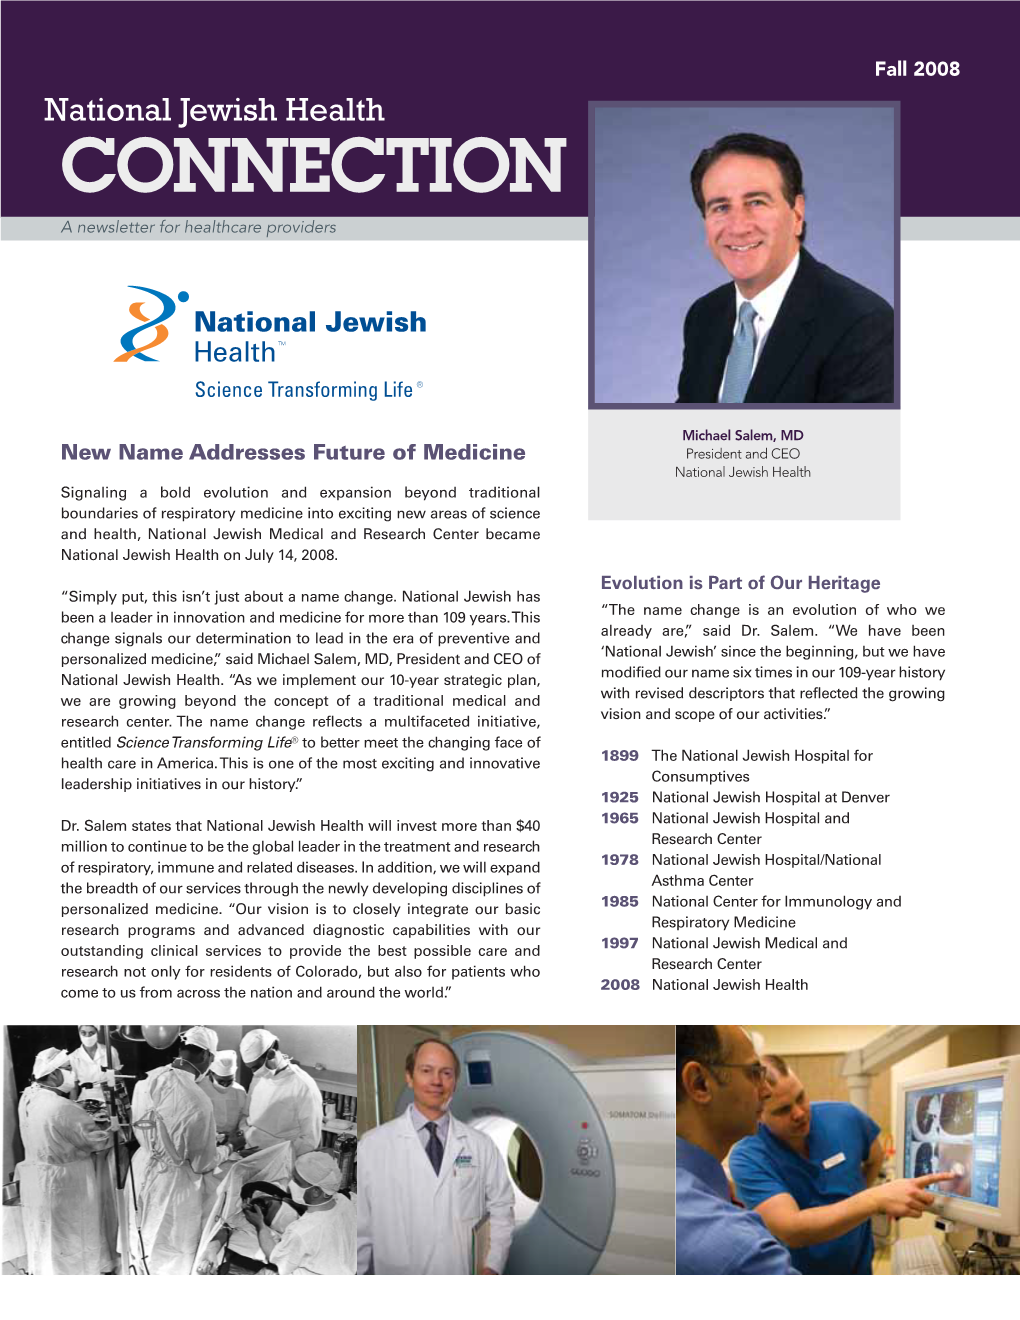 CONNECTION a Newsletter for Healthcare Providers